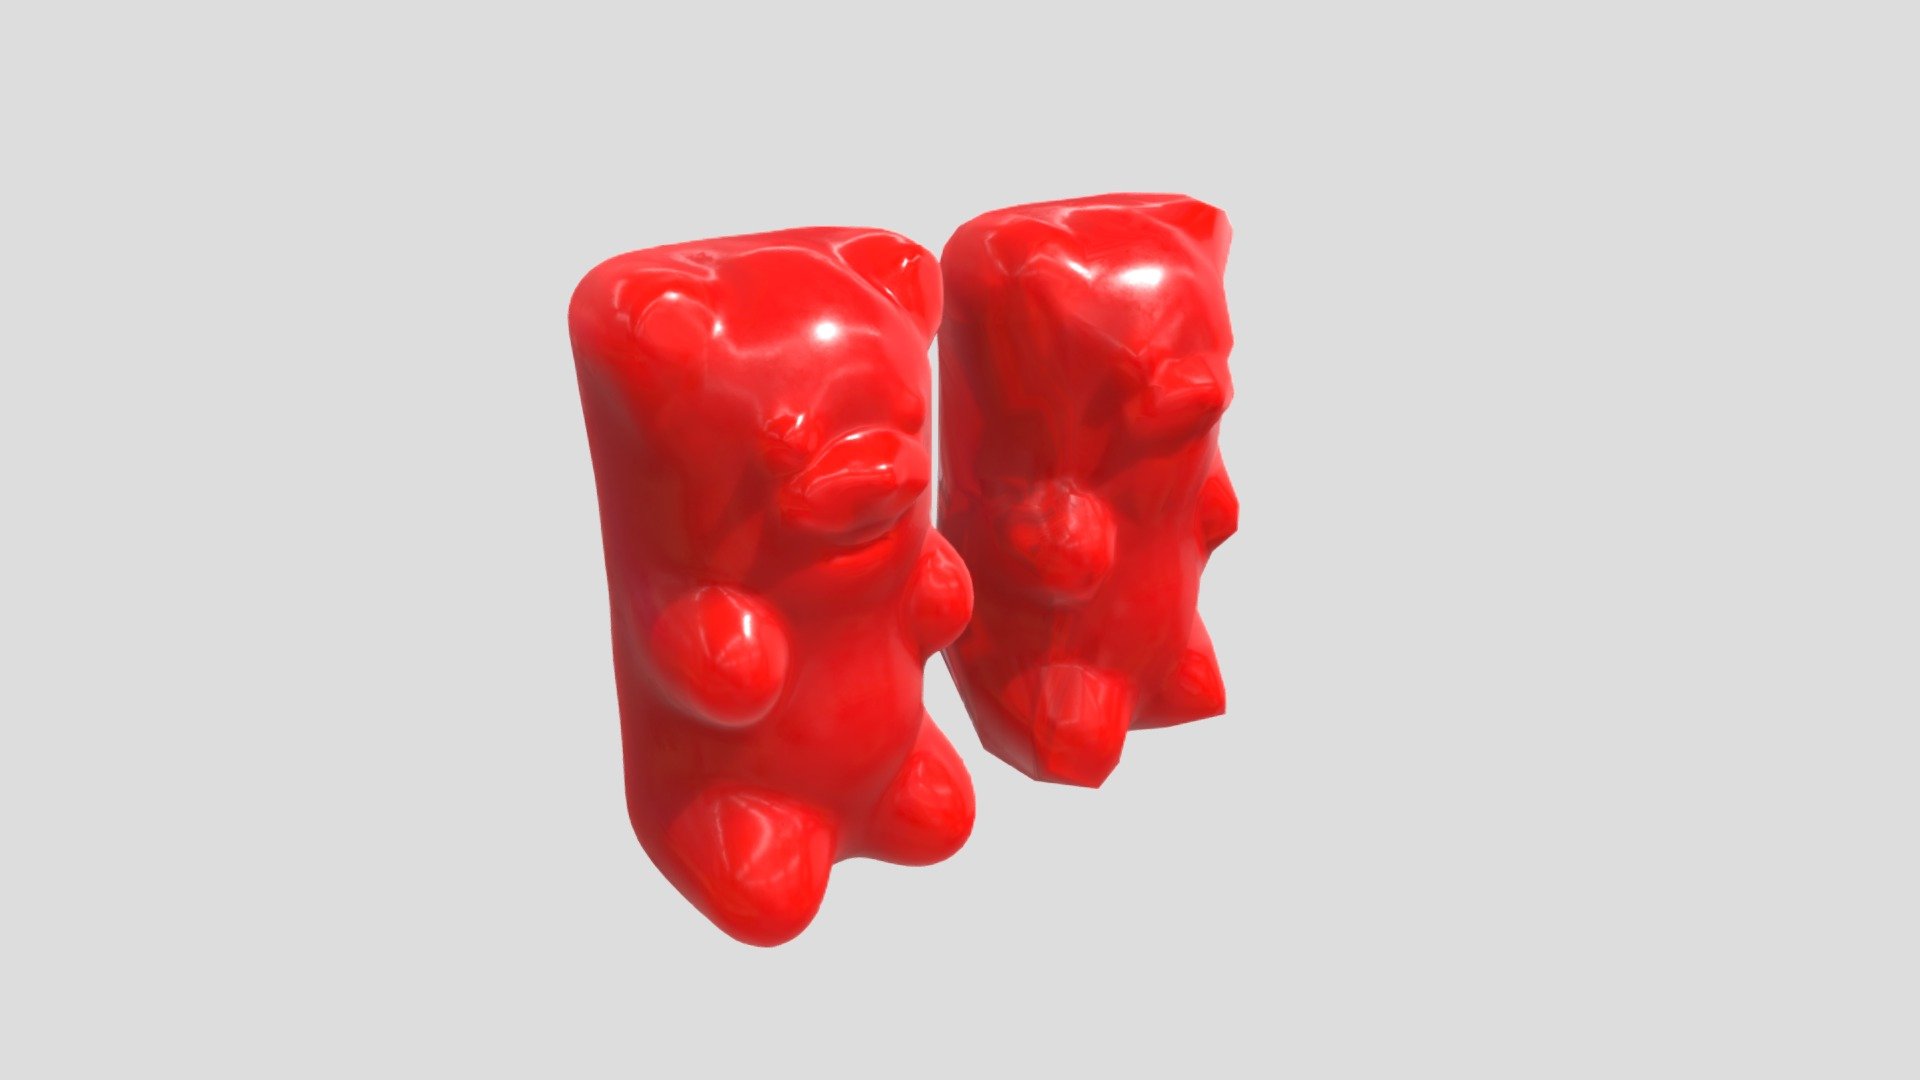 This Gummy Bear comes with a highpoly and lowpoly version perfect for any use case like sims, film, games, etc. The meshes are viewable from all distances and angles. For best texture results add subsurface scattering and transmission.

This Includes:

The mesh (Highpoly 5,743 Vertices, Lowpoly 280 Vertices)
4K and 2K Texture Set (Albedo, Roughness, Normal, Height)
The mesh is UV Unwrapped for easy retexturing 3d model